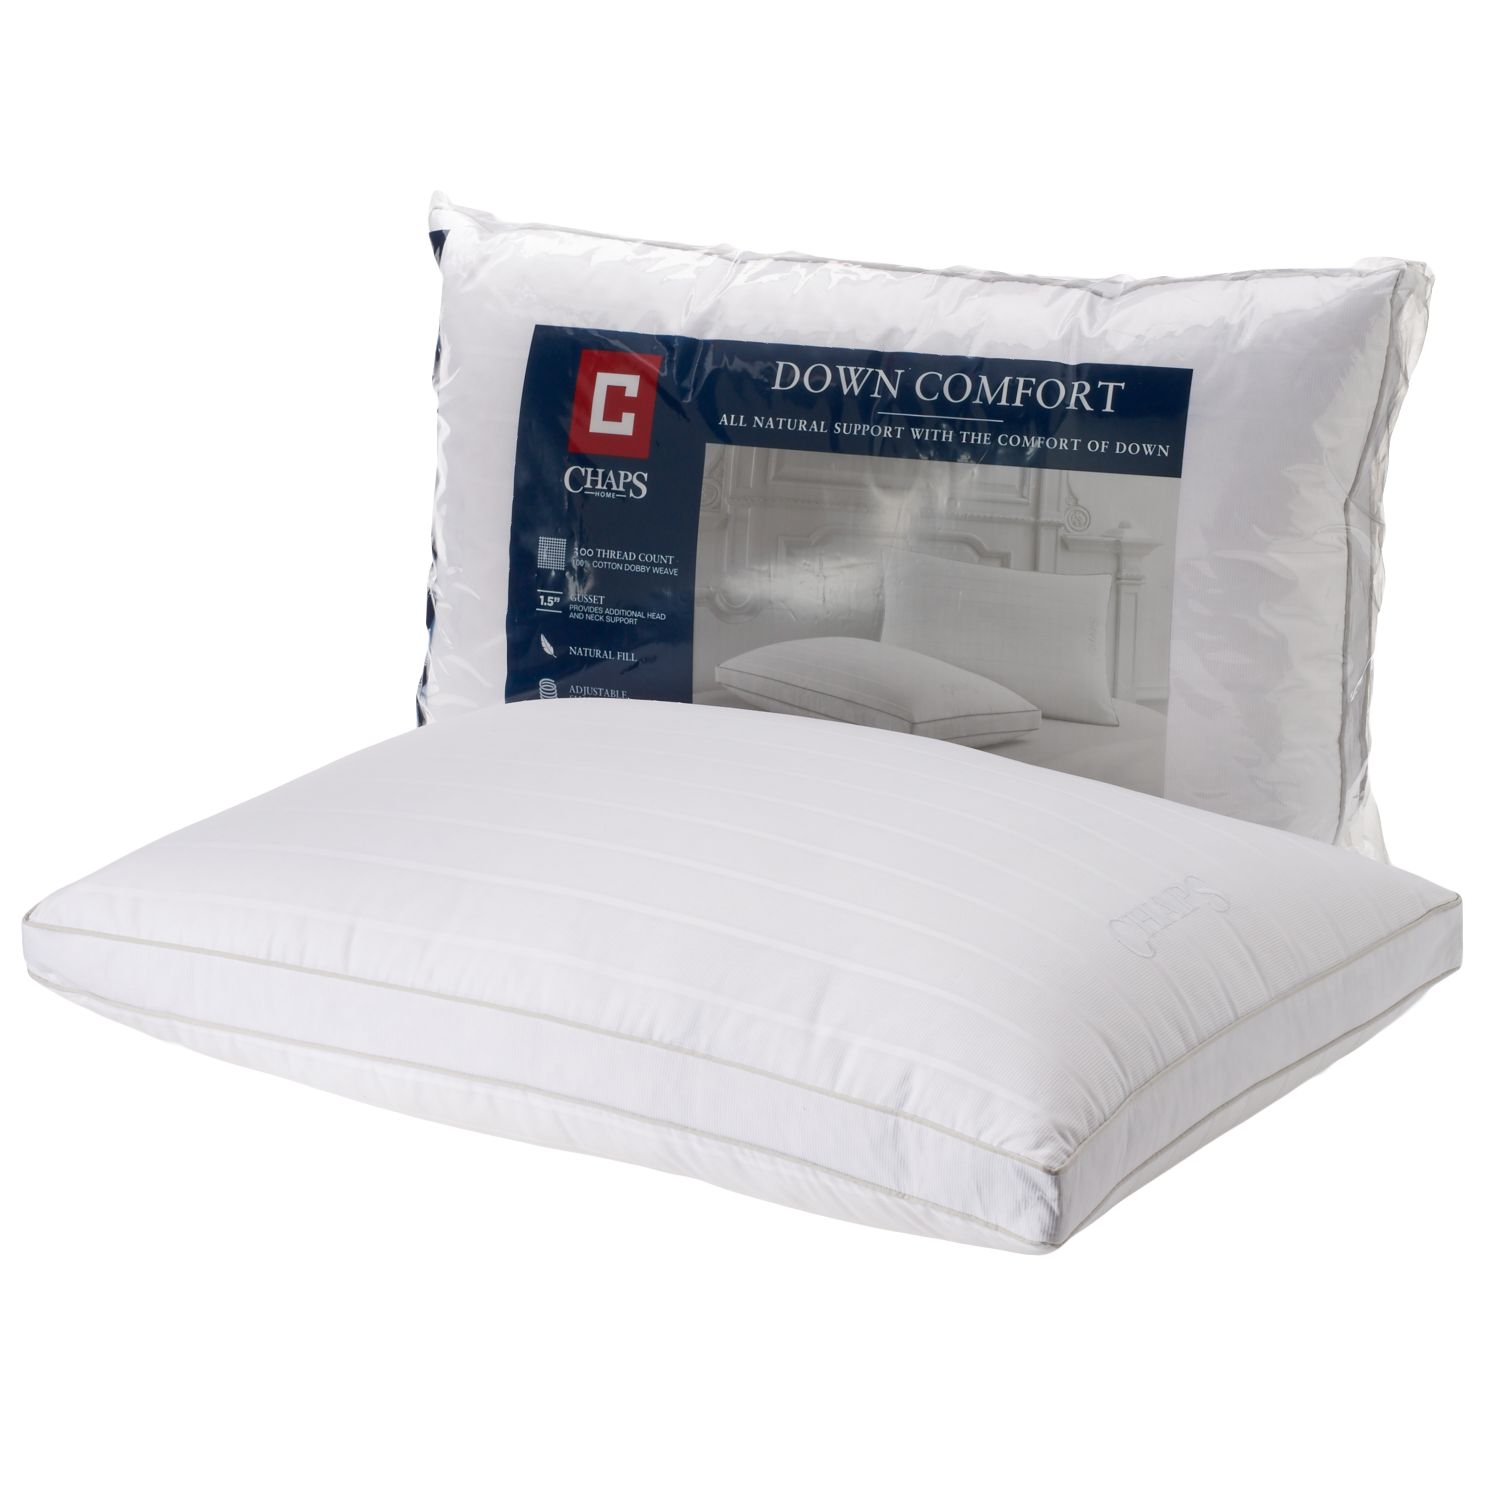 Down Comfort Extra Firm Support Pillow